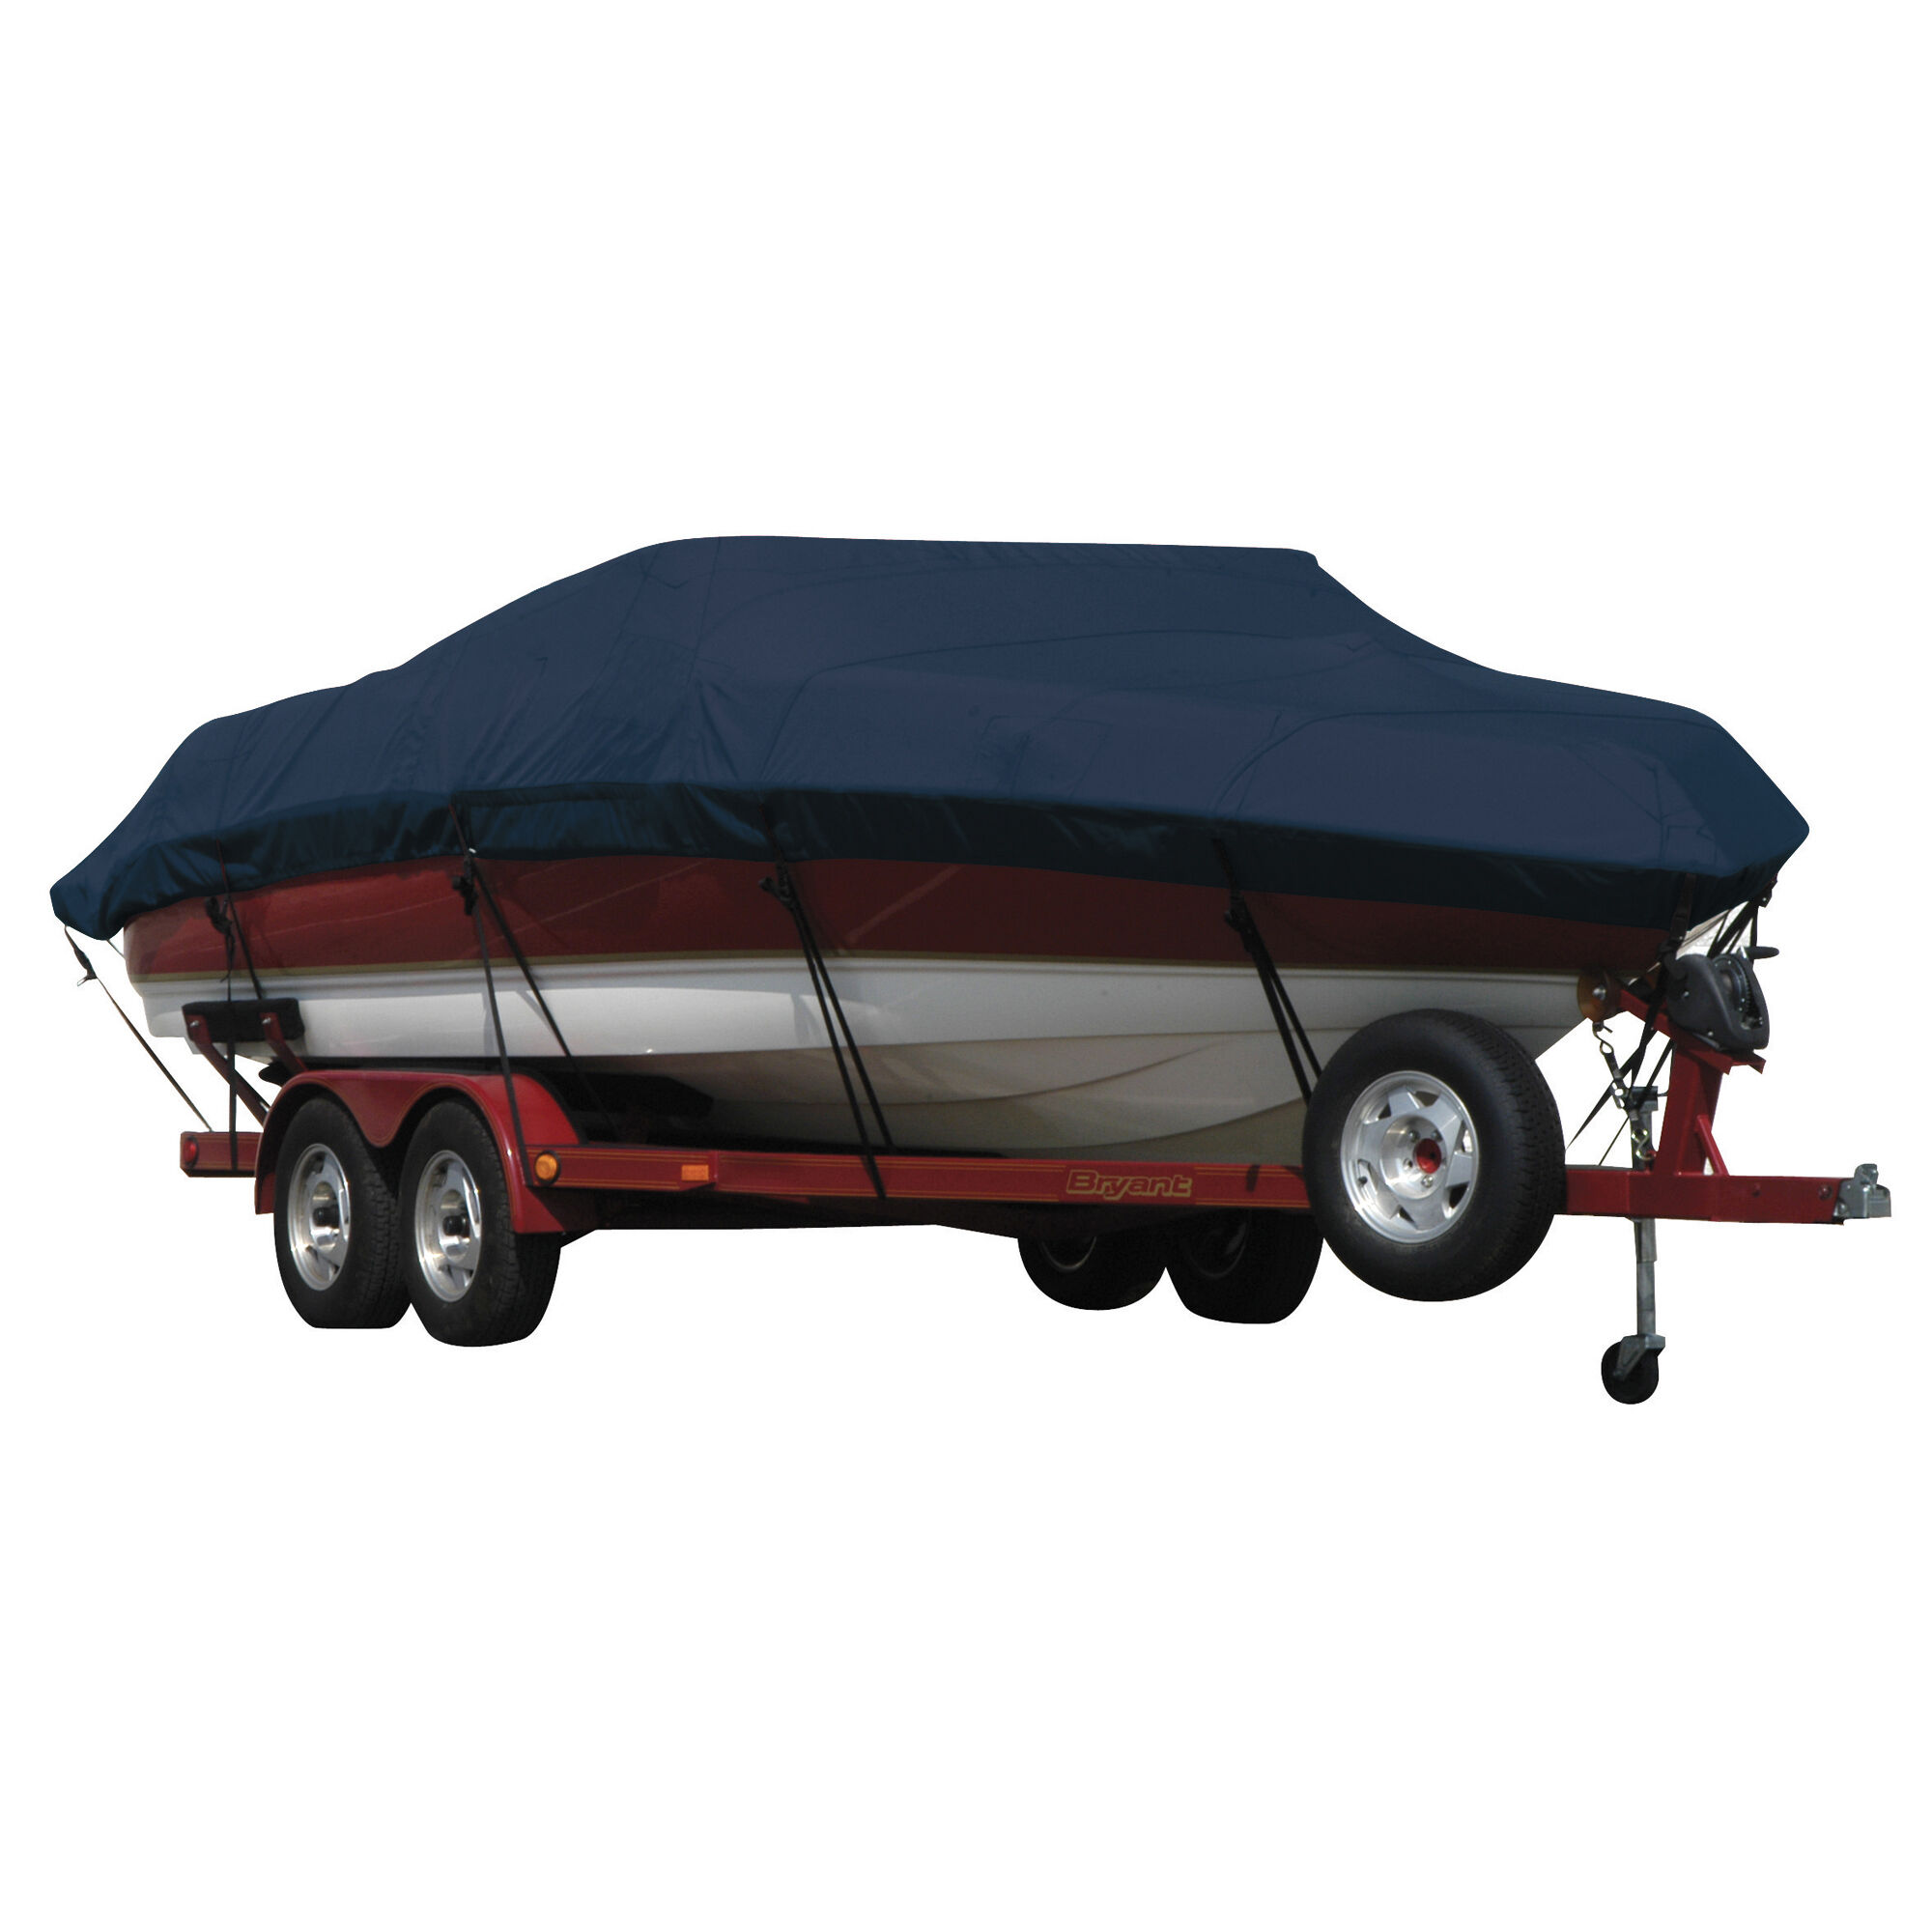 Covermate Exact Fit Sunbrella Boat Cover for Bayliner Classic 192 Ey Classic 192 Ey Does Not Accommodate Strb Ladderi/O. Navy in Navy Blue